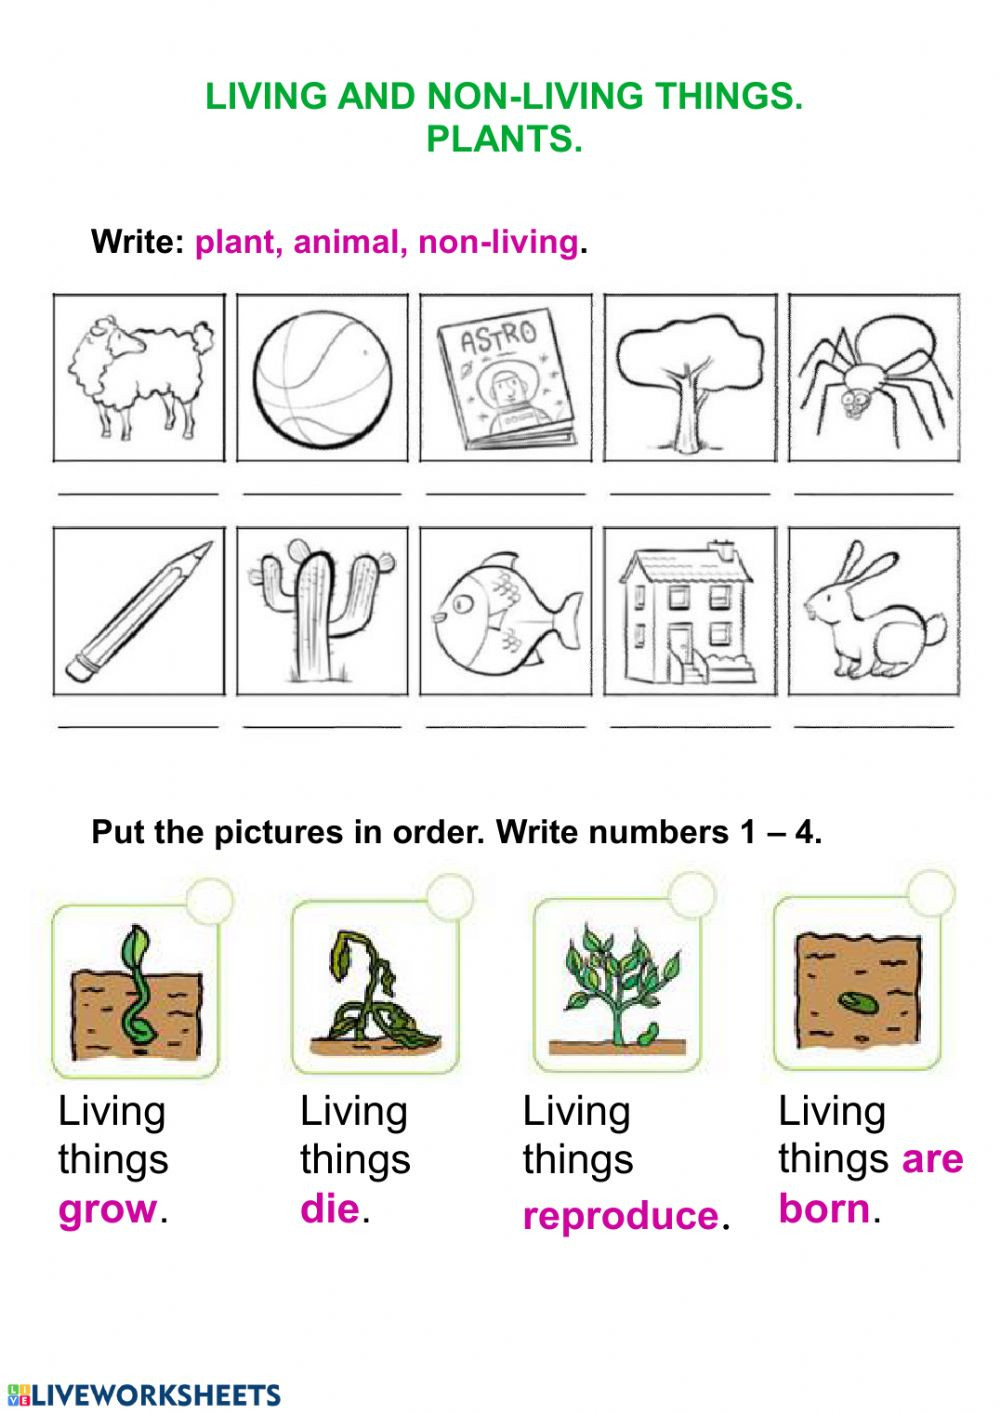 Characteristics Of Living Things Worksheet Living Things and Plants Interactive Worksheet